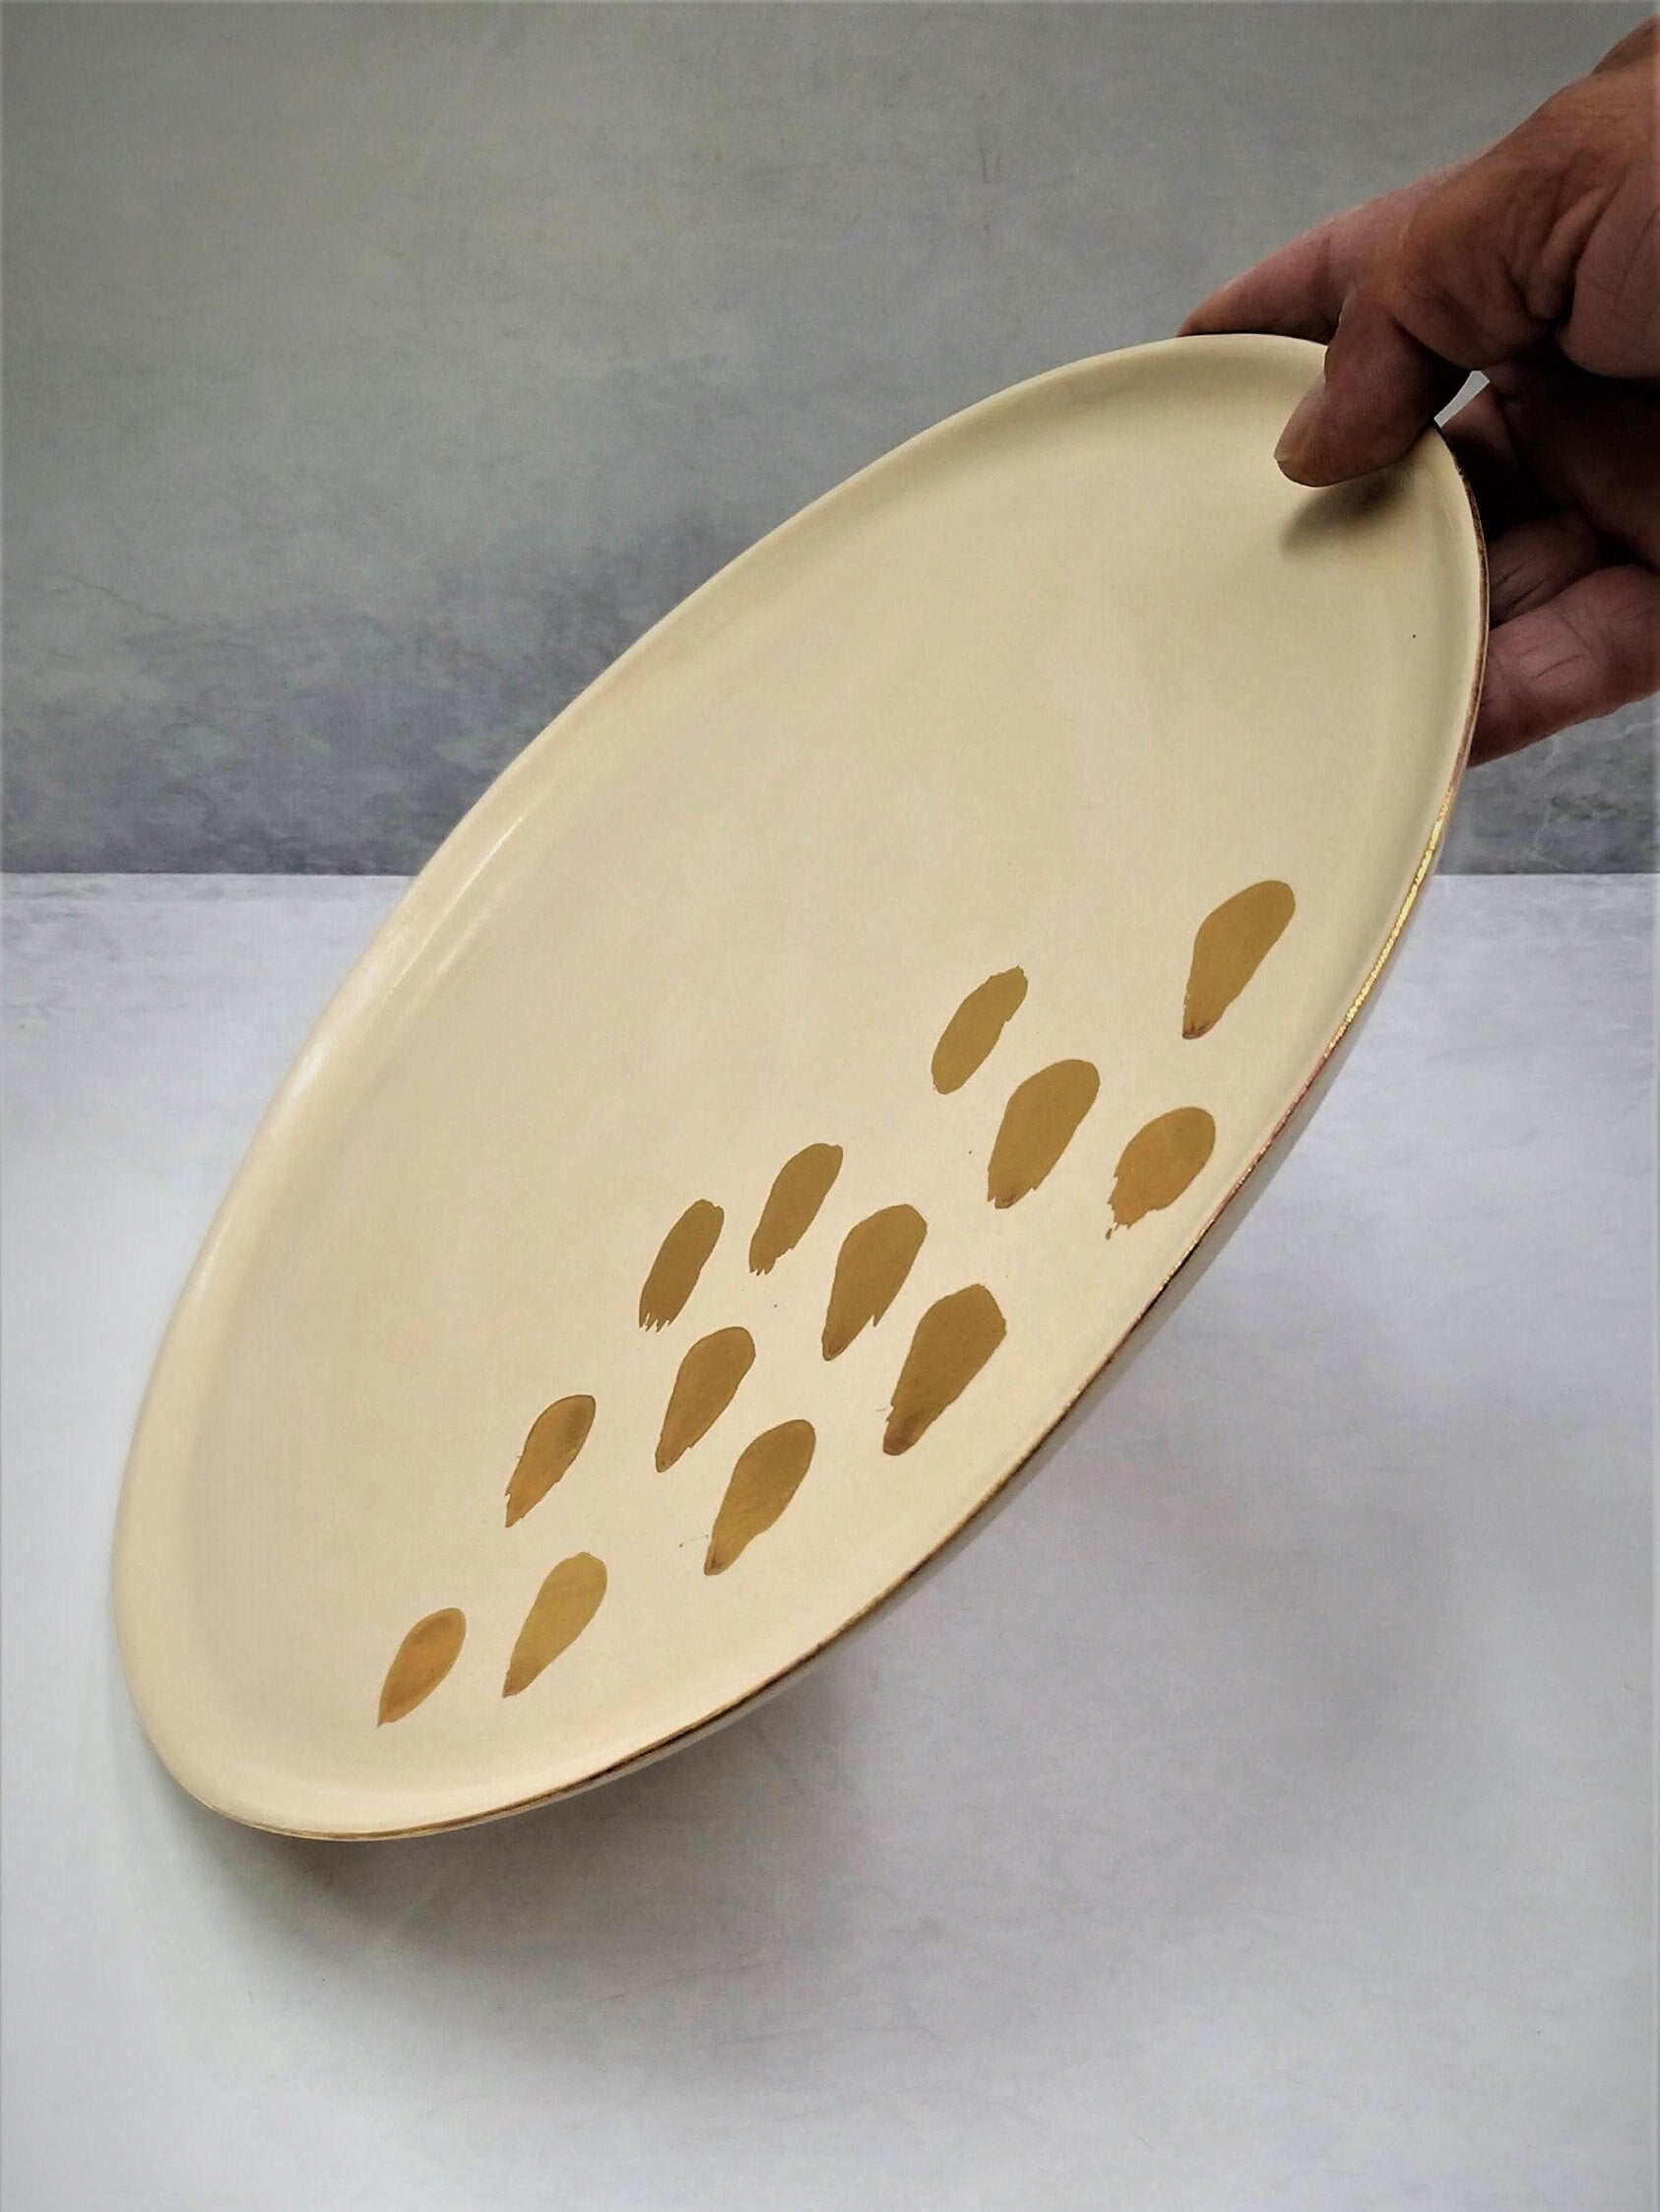 Luxury ceramic plate with gold dots